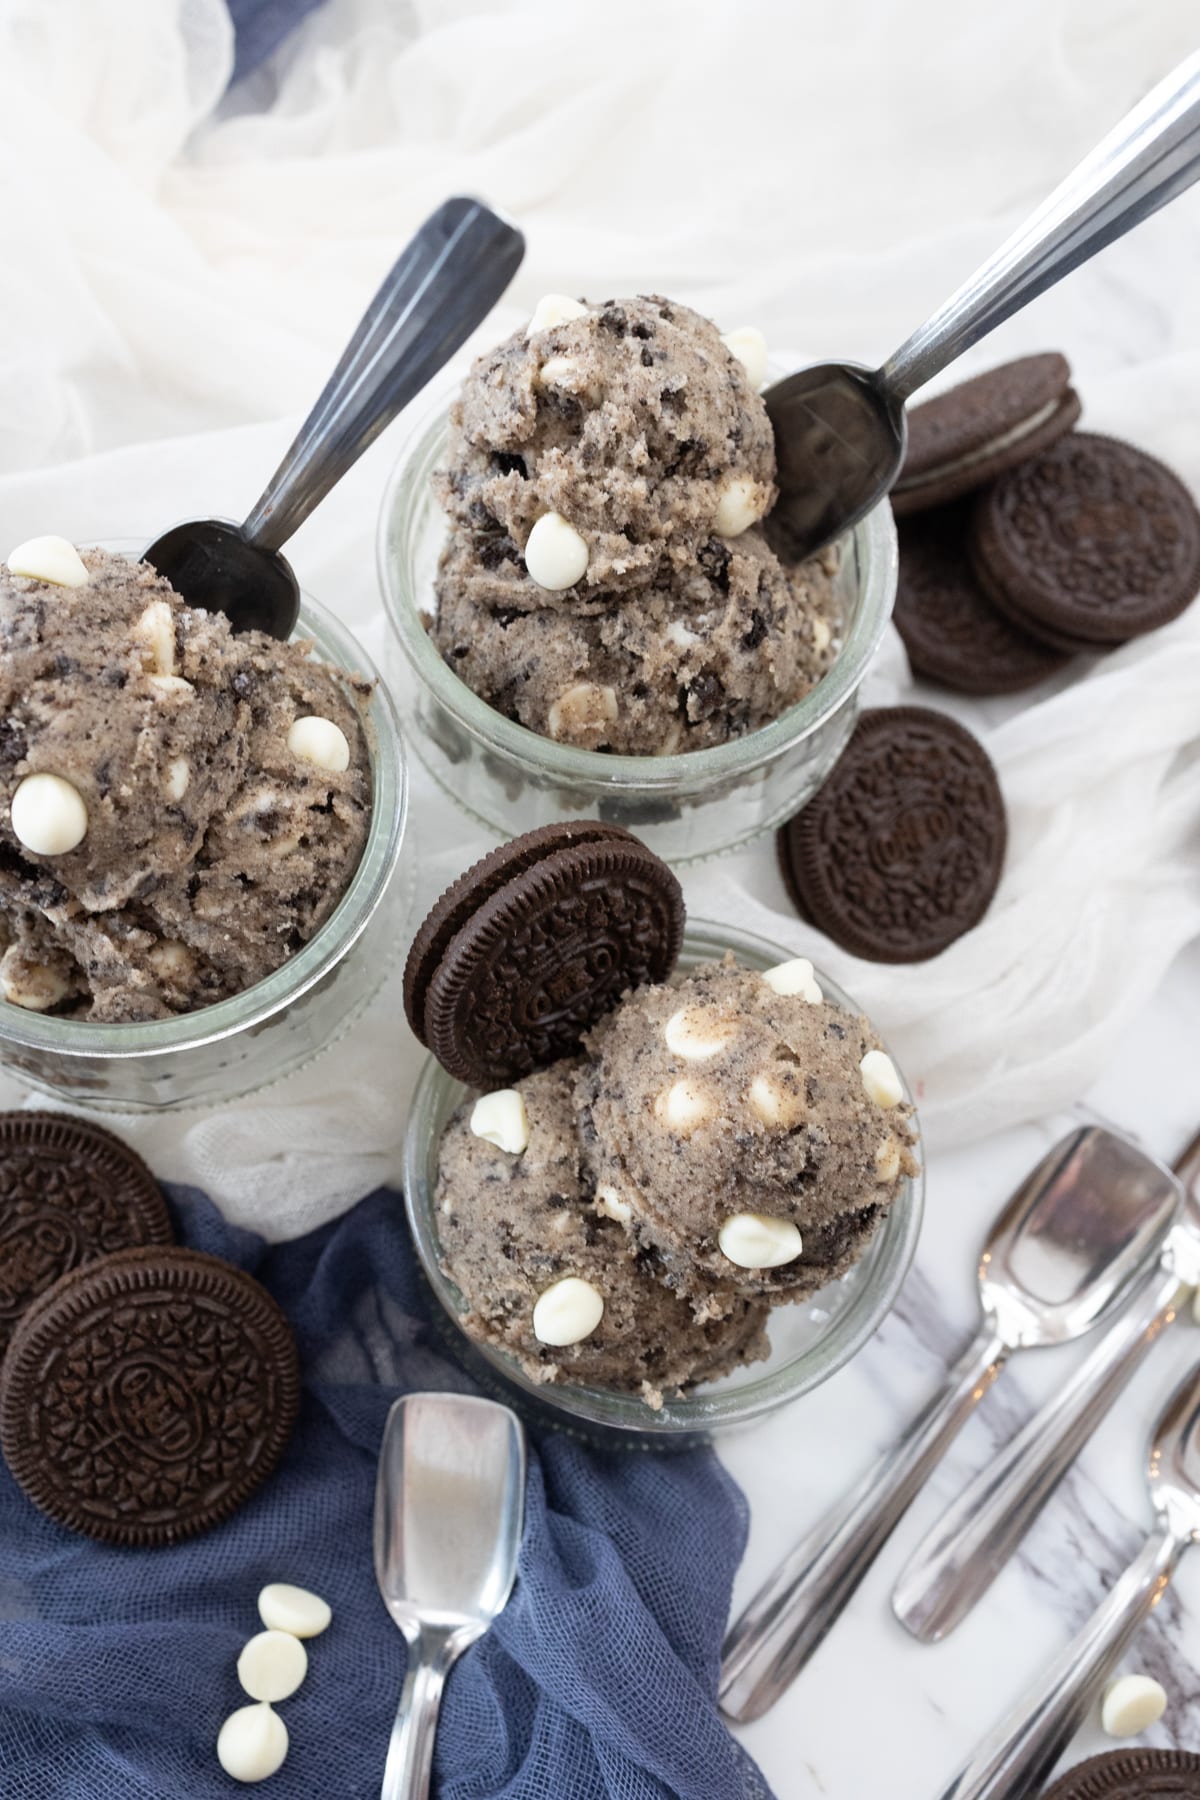 Top view of small glass bowls containing Edible Cookie Dough that has a spoon and an oreo cookie sticking out of it like an ice cream wafer, on a surface which has white and blue fabric on it for decoration.